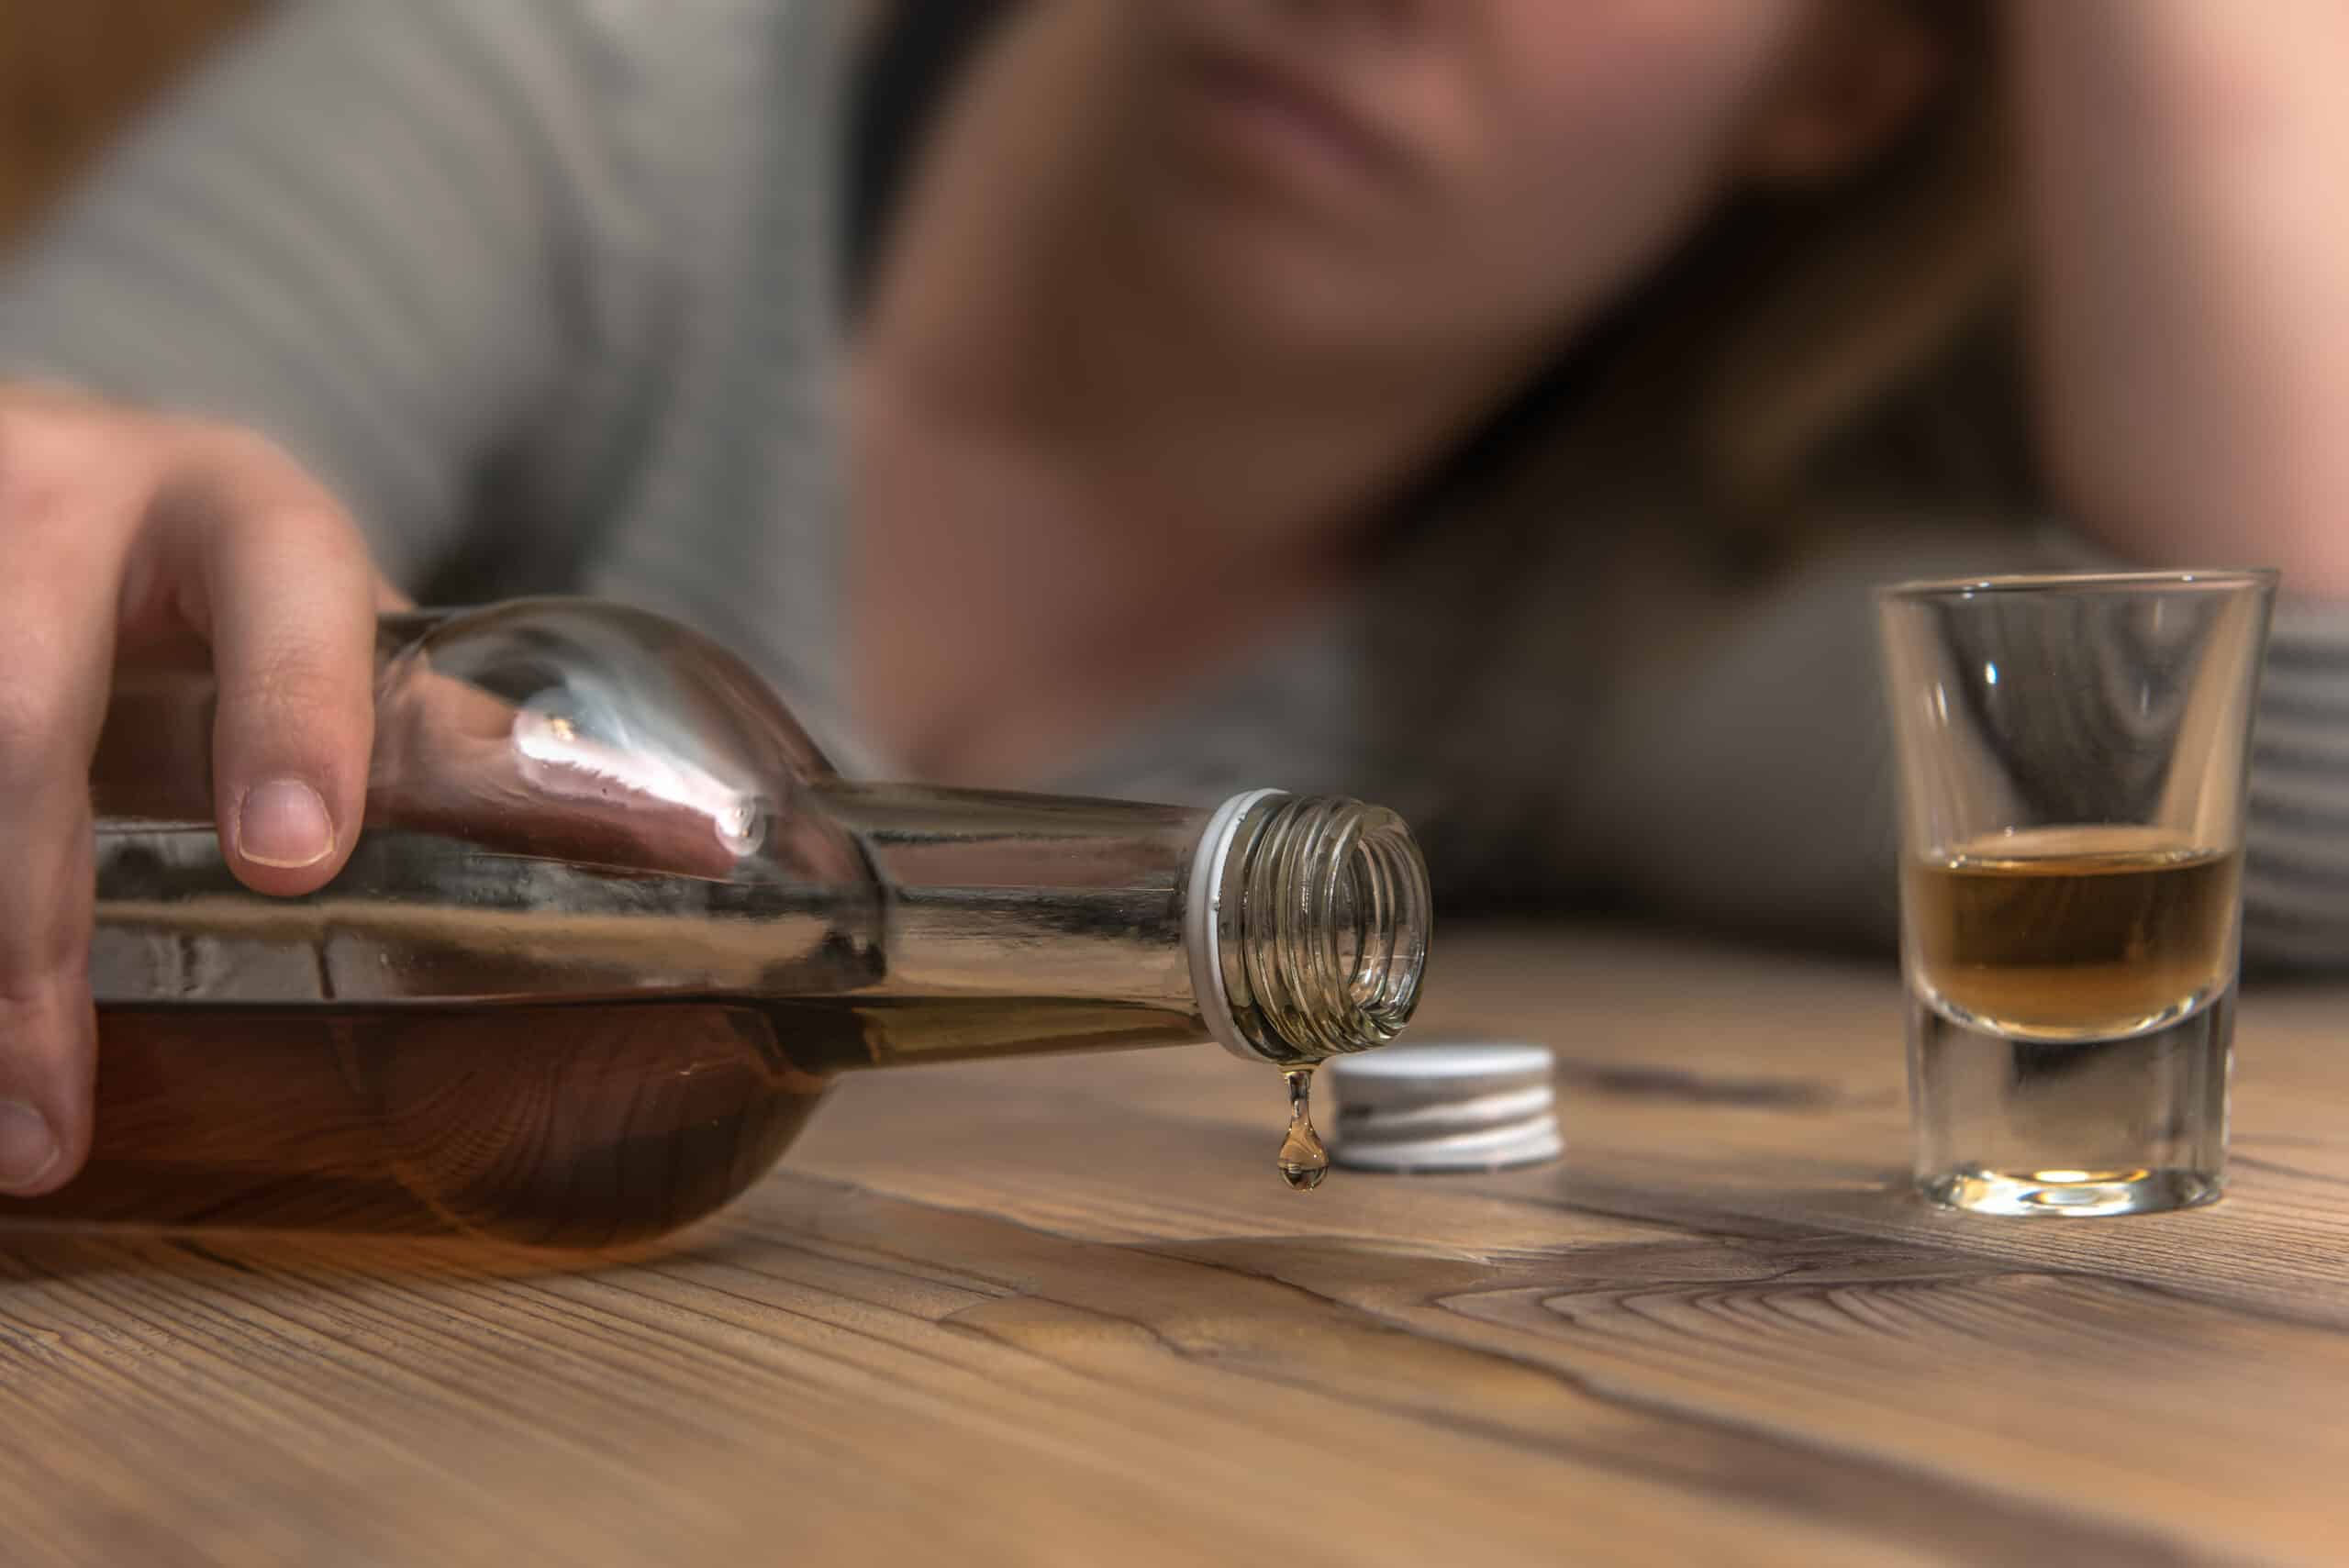 What Are the Signs of Alcoholism in Women?